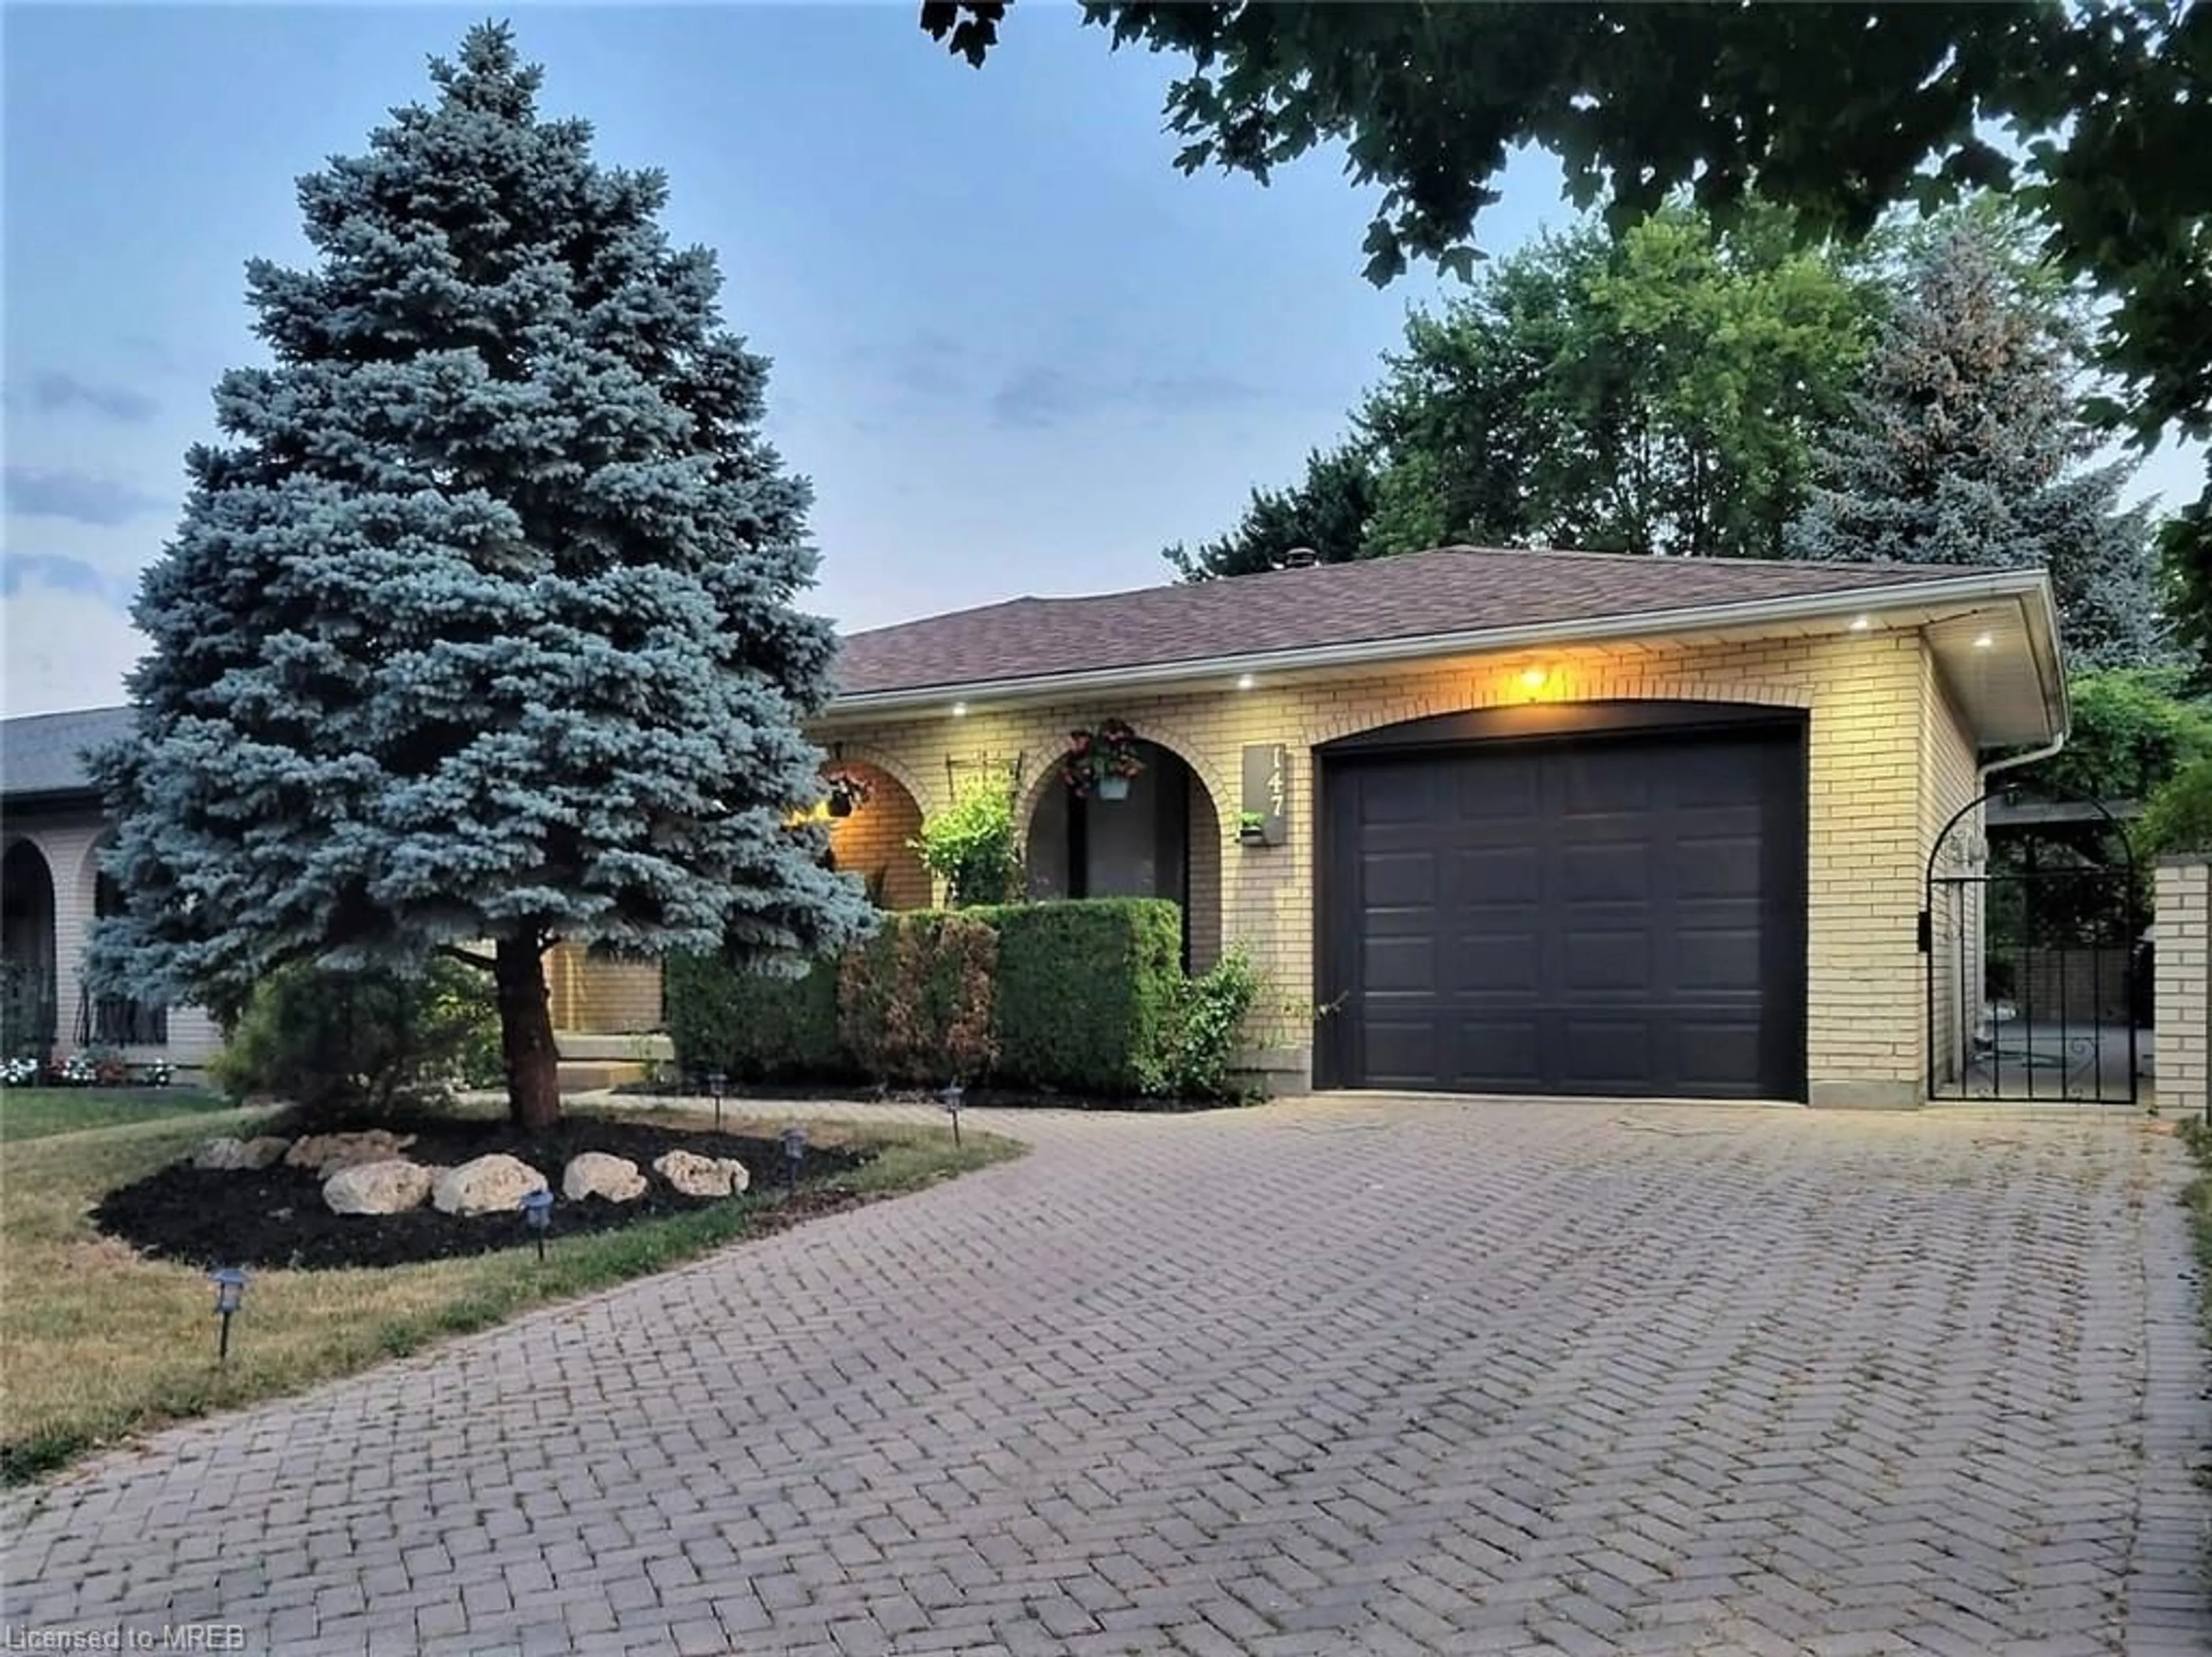 Home with brick exterior material for 147 Muriel Cres, London Ontario N6E 2K4